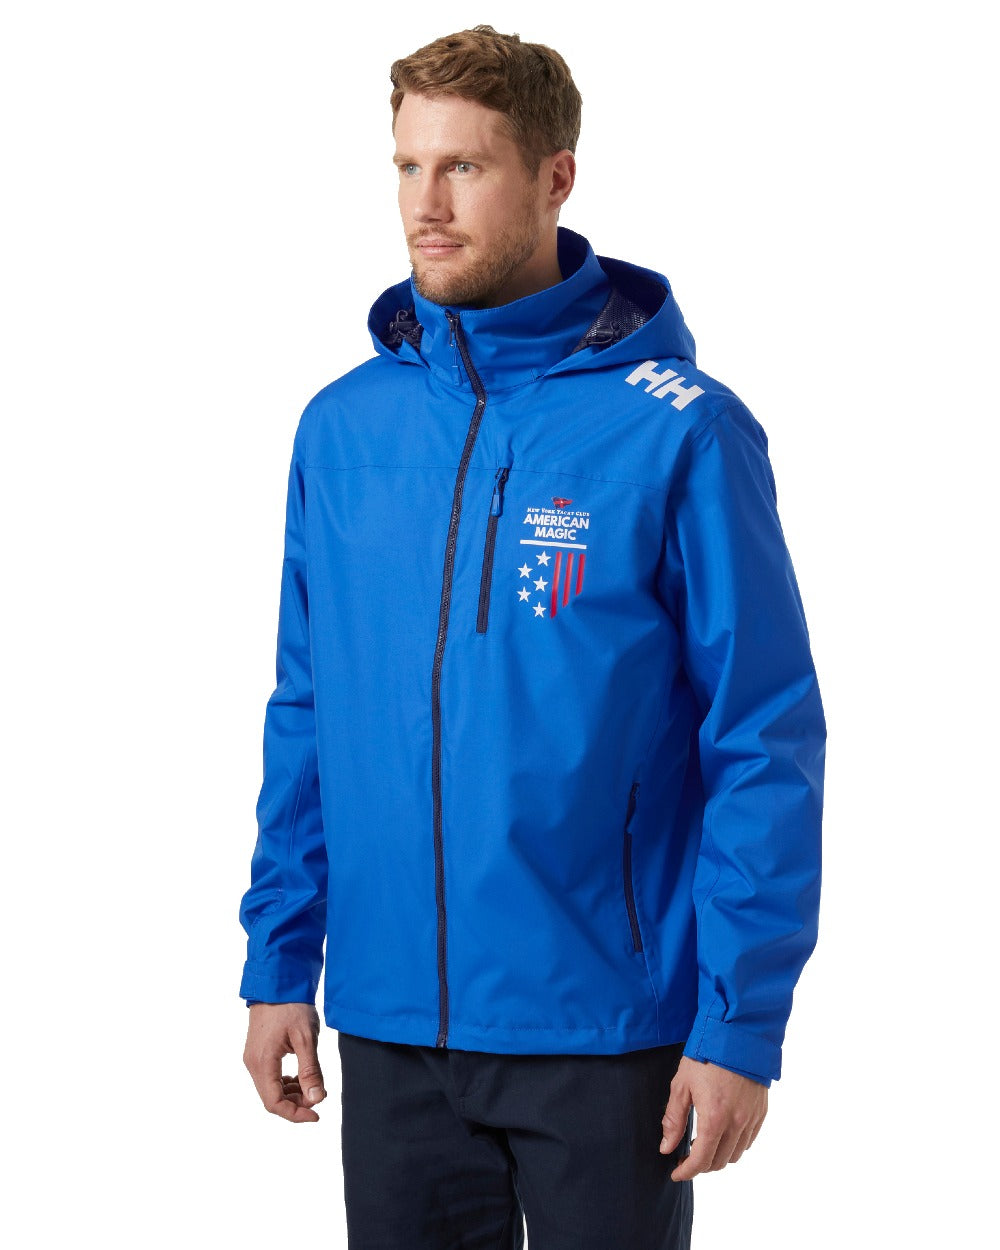 Cobalt 2.0 coloured Helly Hansen American Magic Crew Hooded Jacket 2.0 on white background 